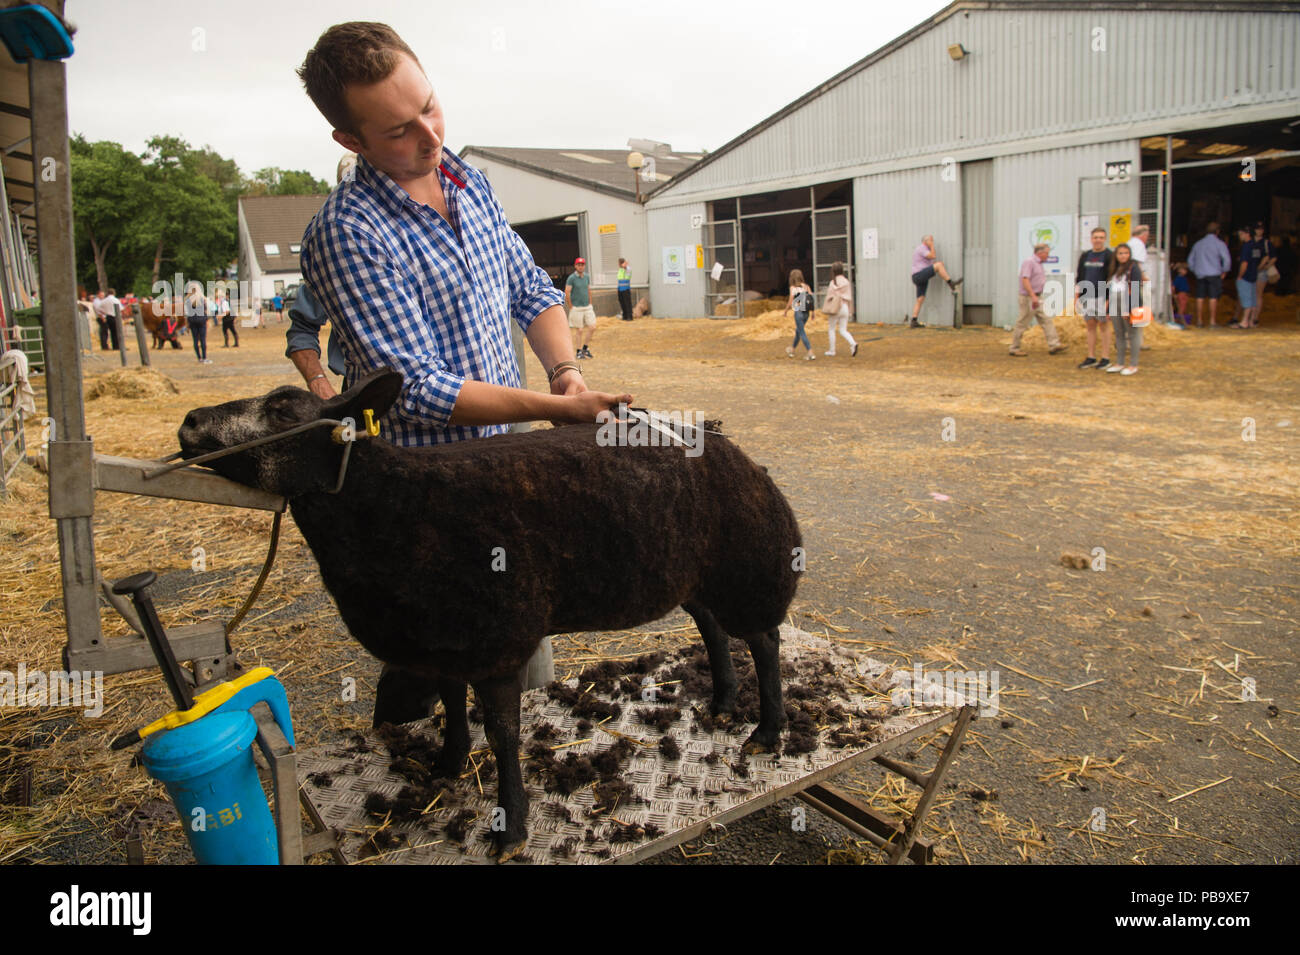 A Farmer preparing  his prize  Blue Texel sheep for competition   at The Royal Welsh Show, the UK's leading agriculture and farming event, held annually at the purpose built show ground at Builth Wells, Powys, Wales Stock Photo